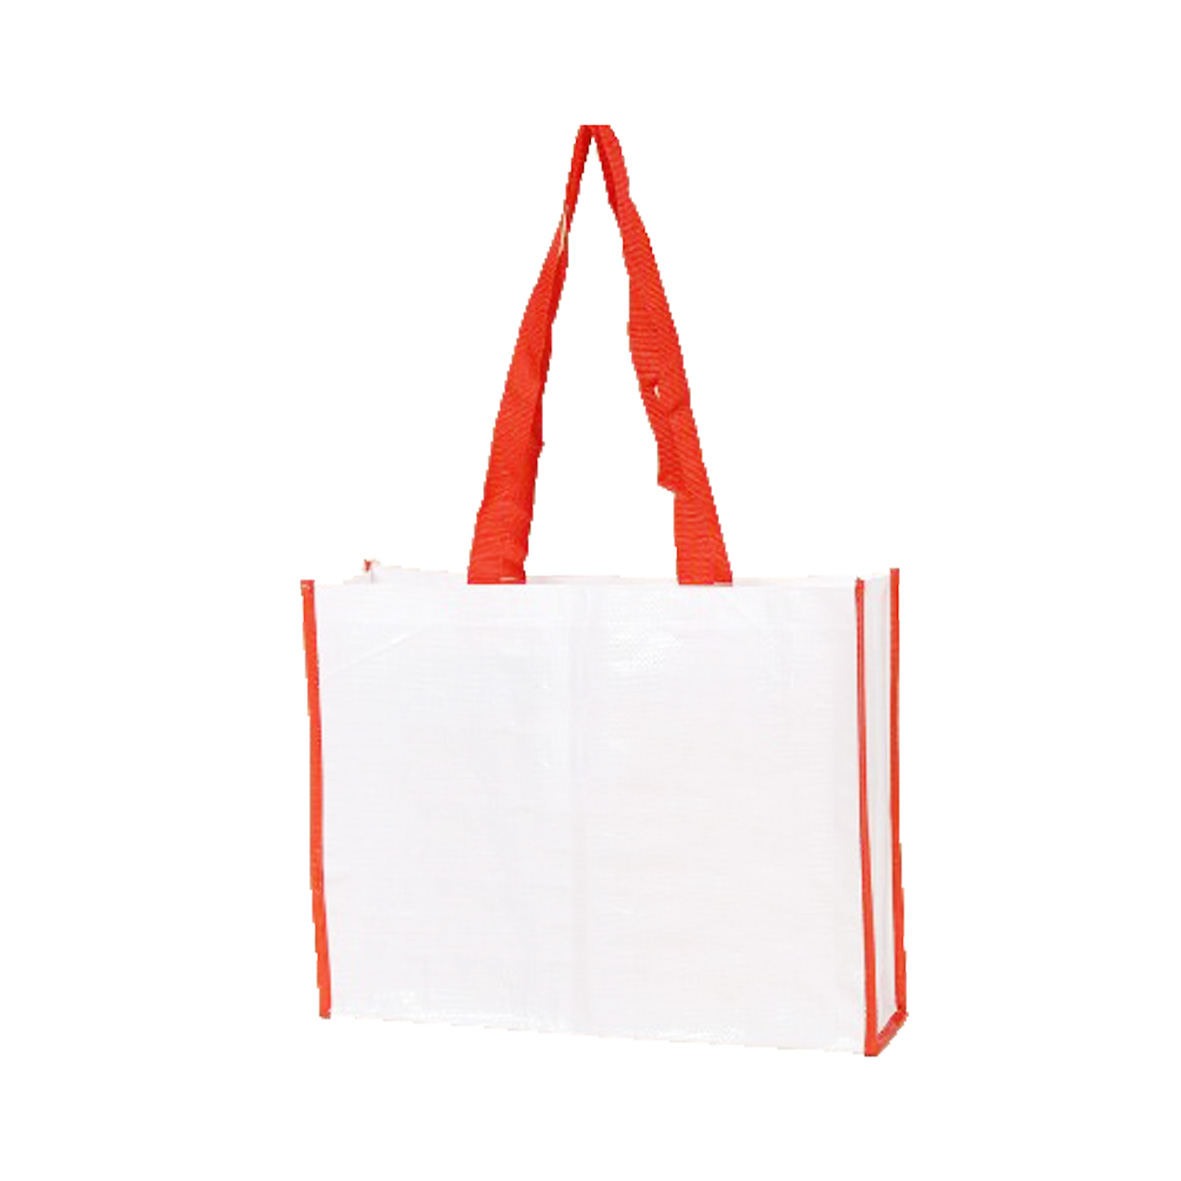 GL-AAA2438 Full imprint Non-Woven Tote Bag with Polypropylene Film